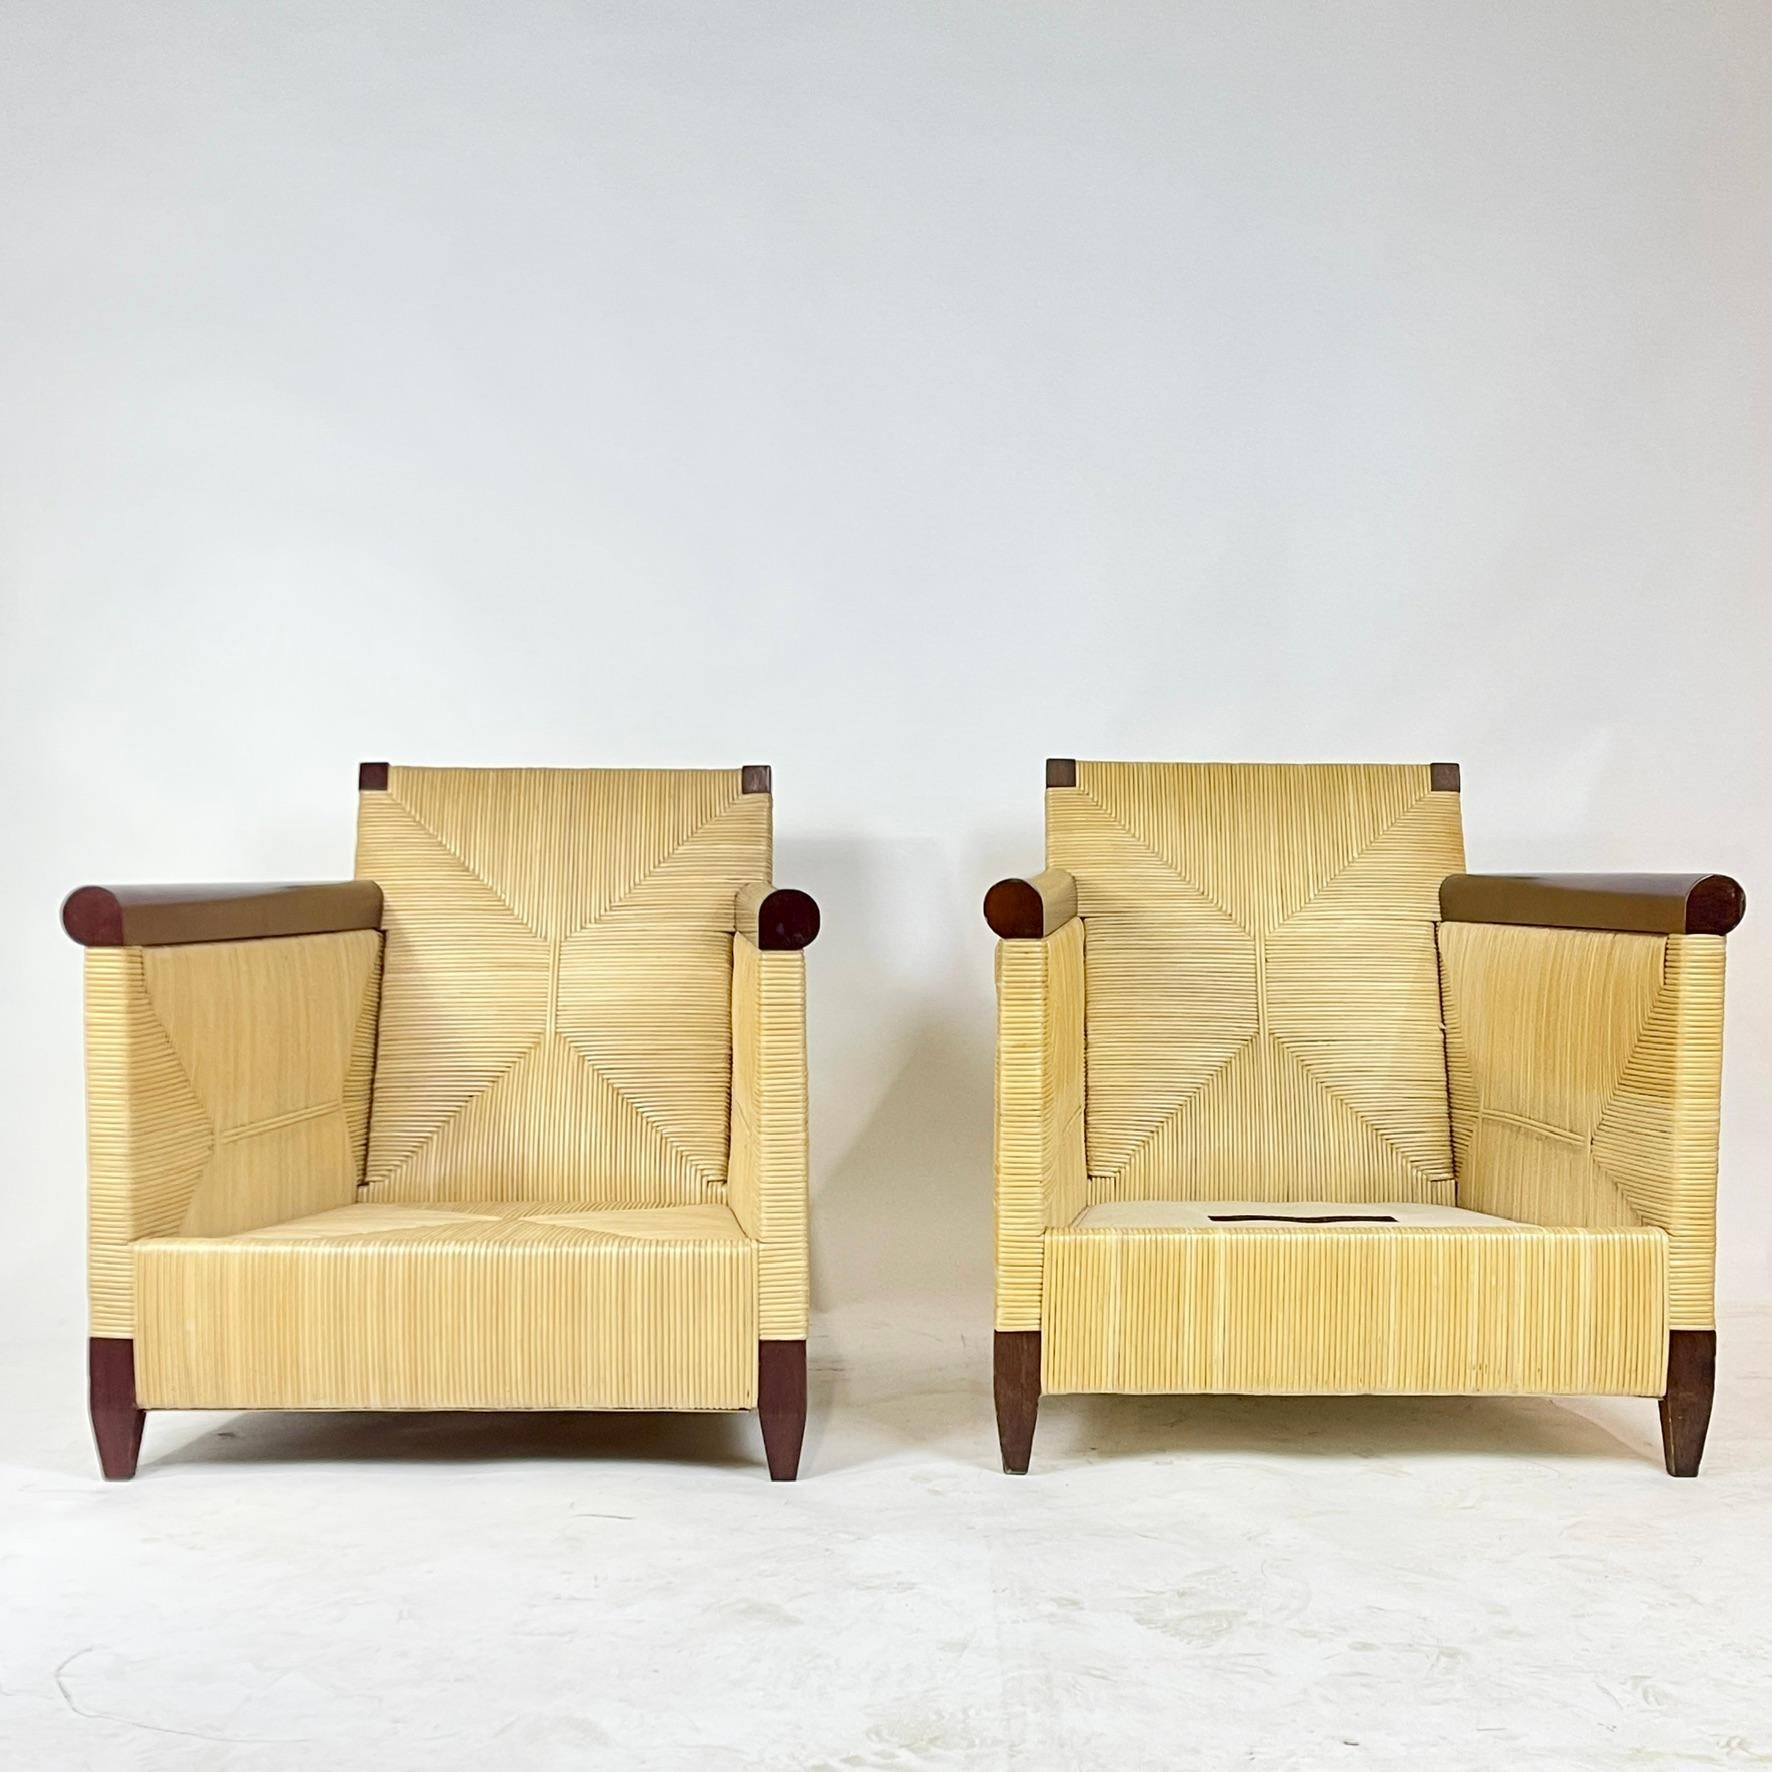 Absolutely stunning pair of vintage Coastal lounge chairs designed by John Hutton for Donghia. Chairs are imprinted on base and one chair has Donghia label under the seat cushion. These chairs are absolutely stunning from all angles. Very solid and